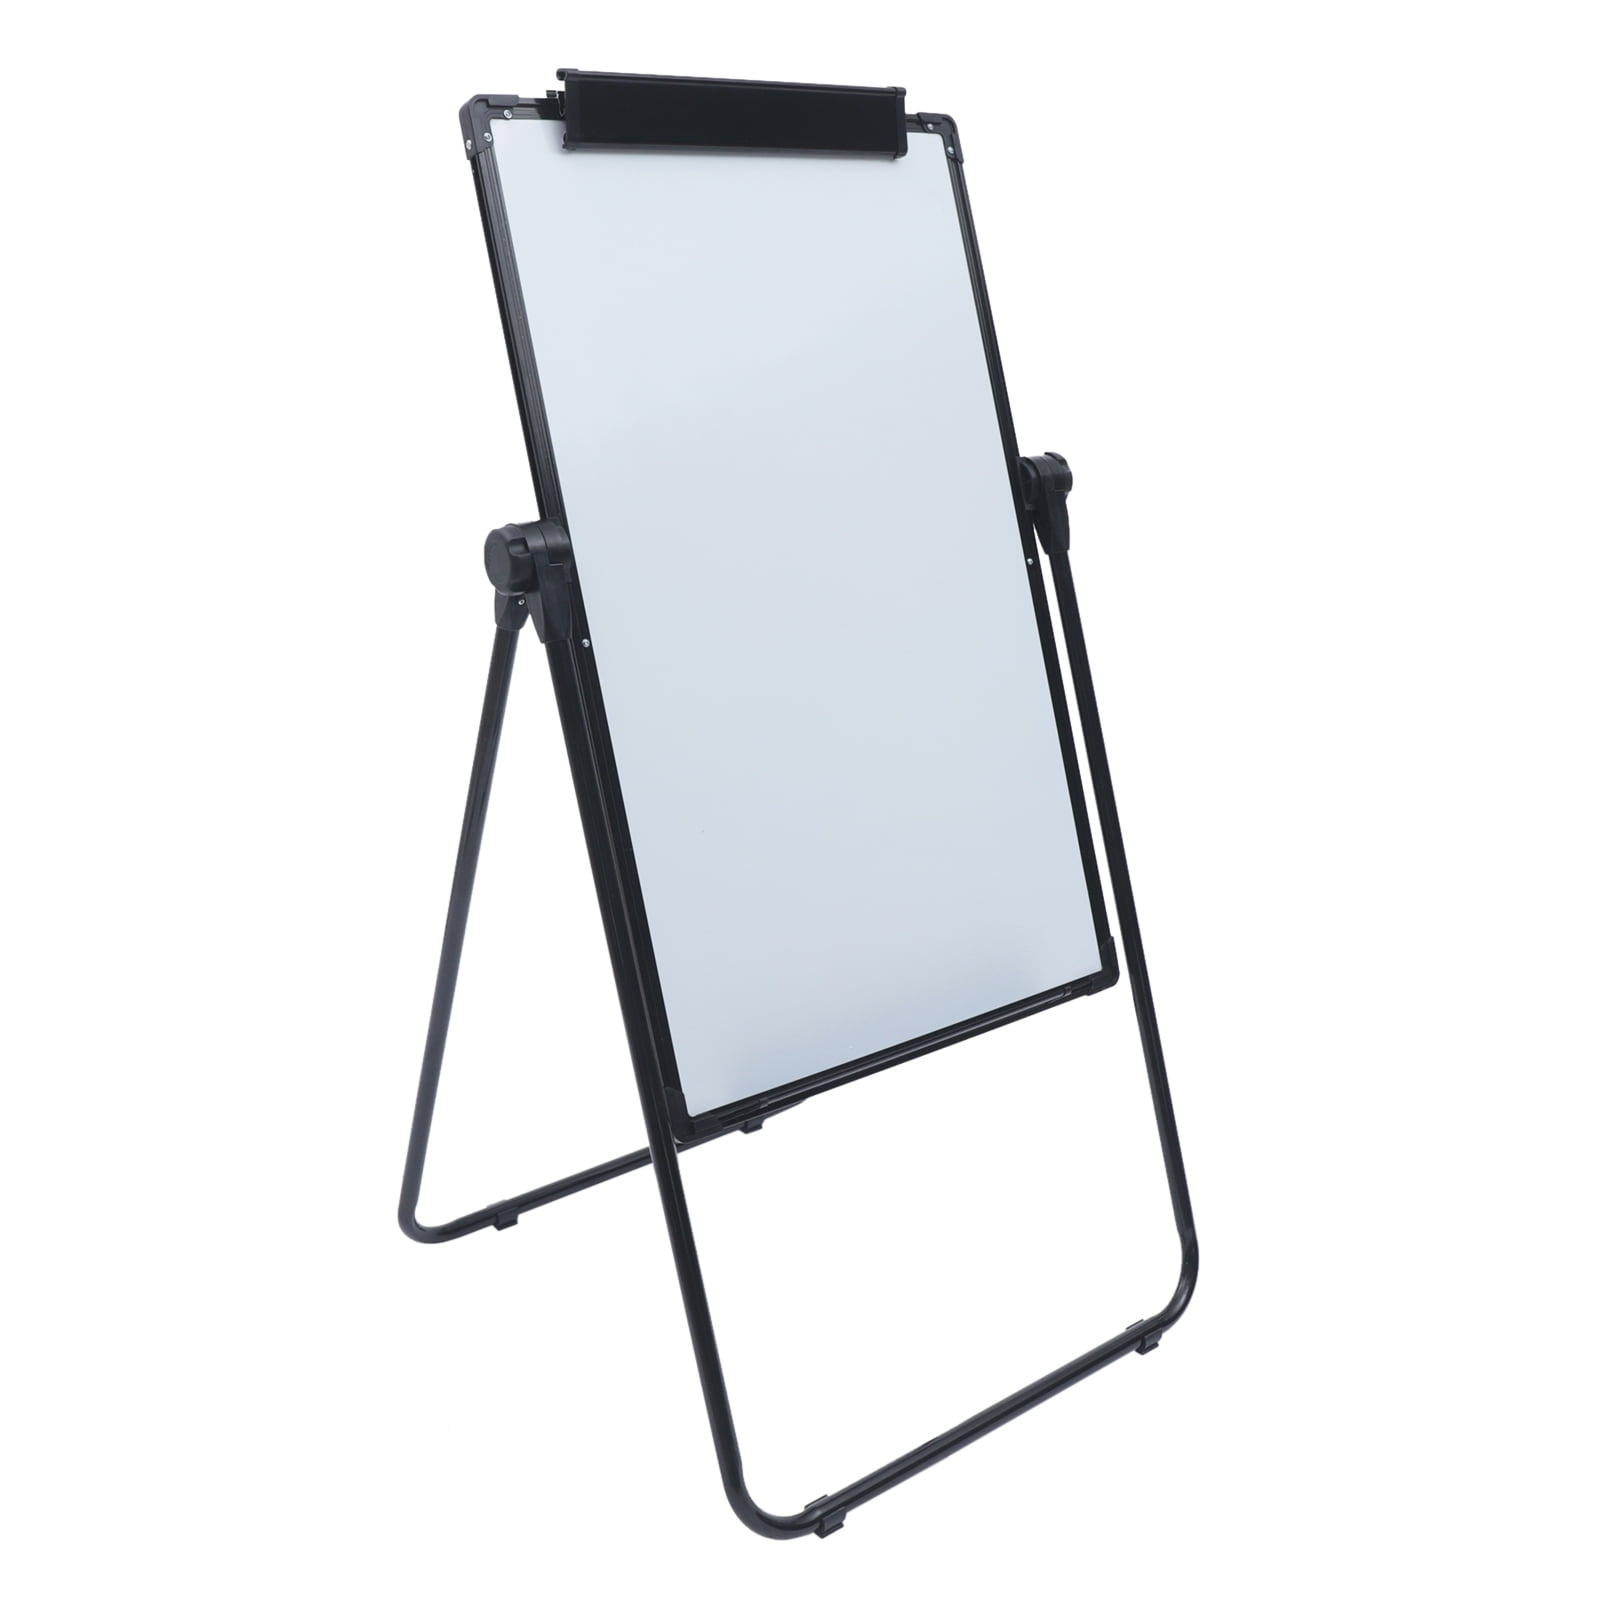 Loyalheartdy 35x24In Portable Whiteboard,Double Sided Magnetic Dry Erase  Board Free Standing Adjustable Flip Chart Easel